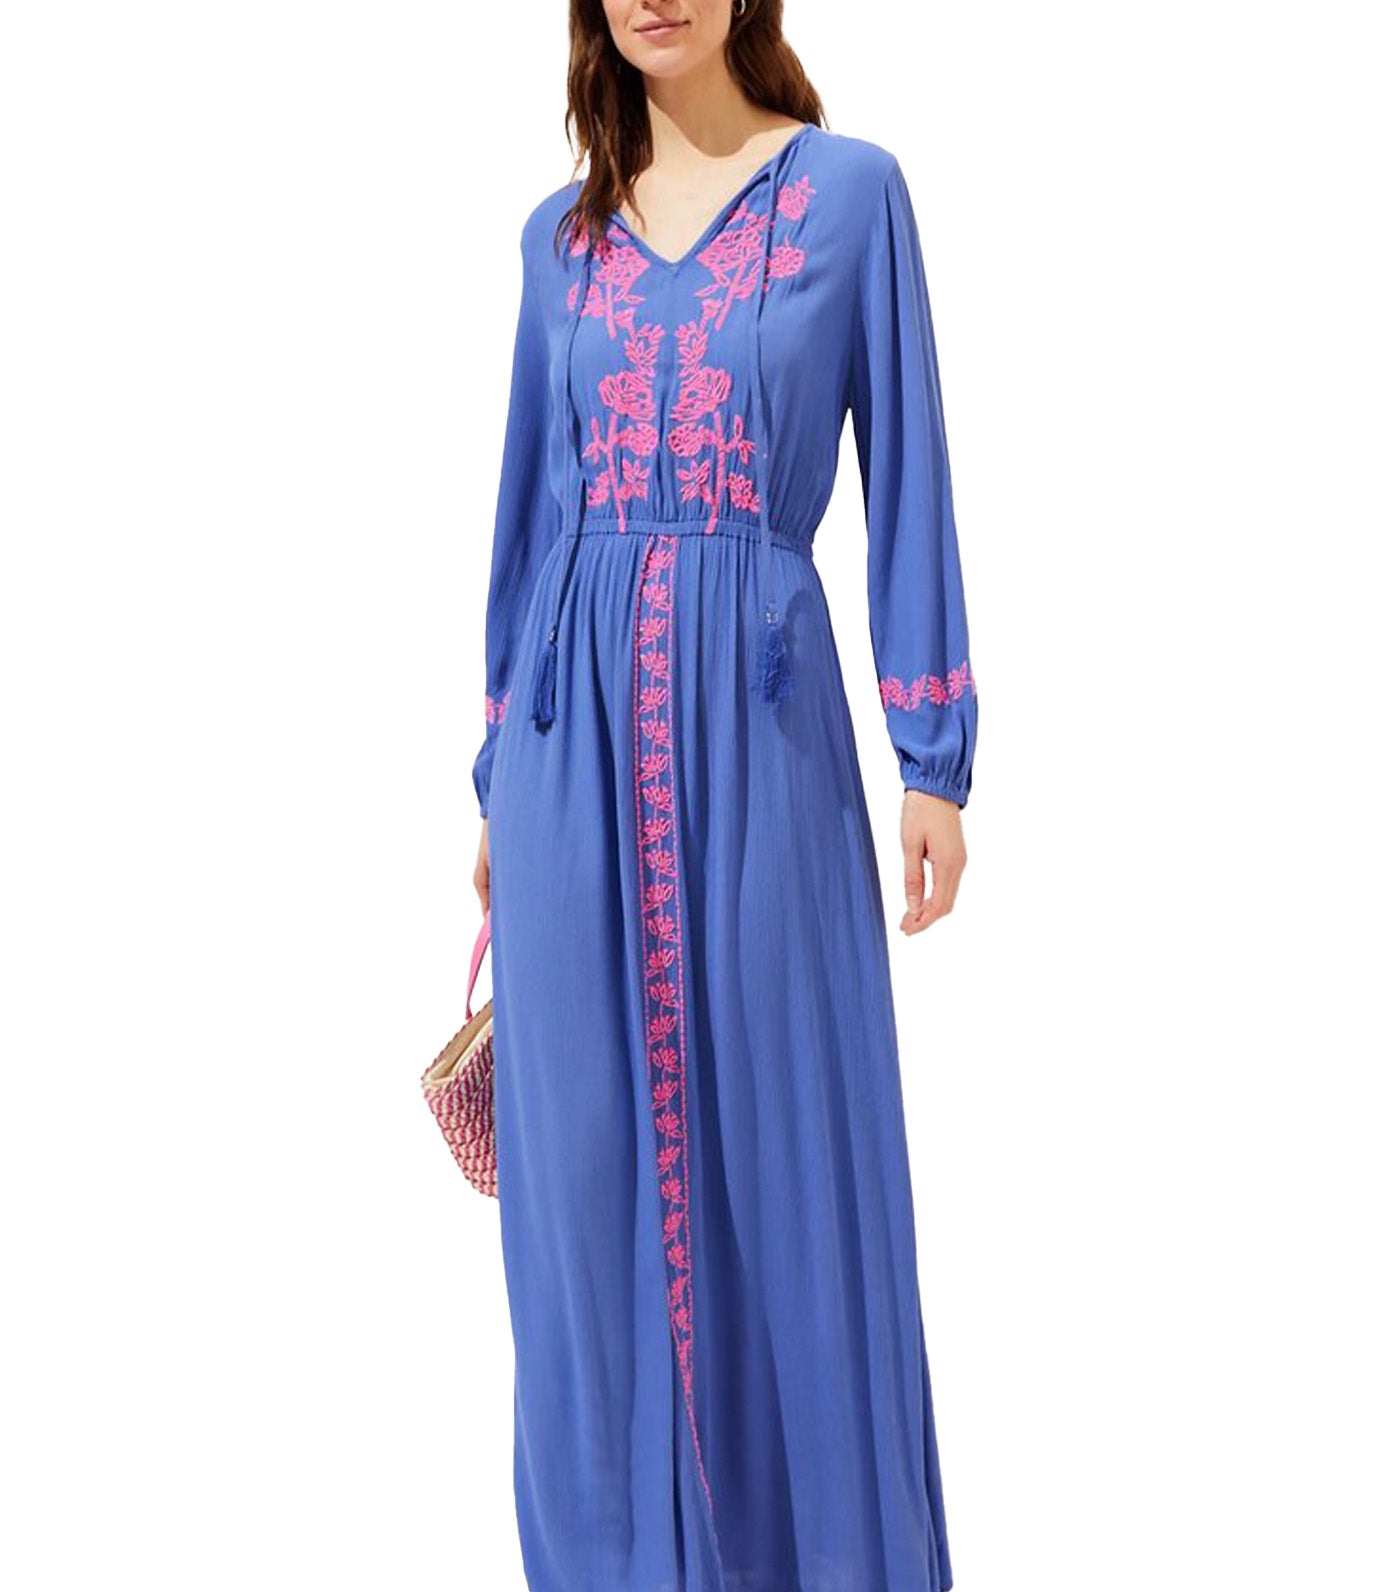 Embroidered V-Neck Maxi Beach Dress Lupin